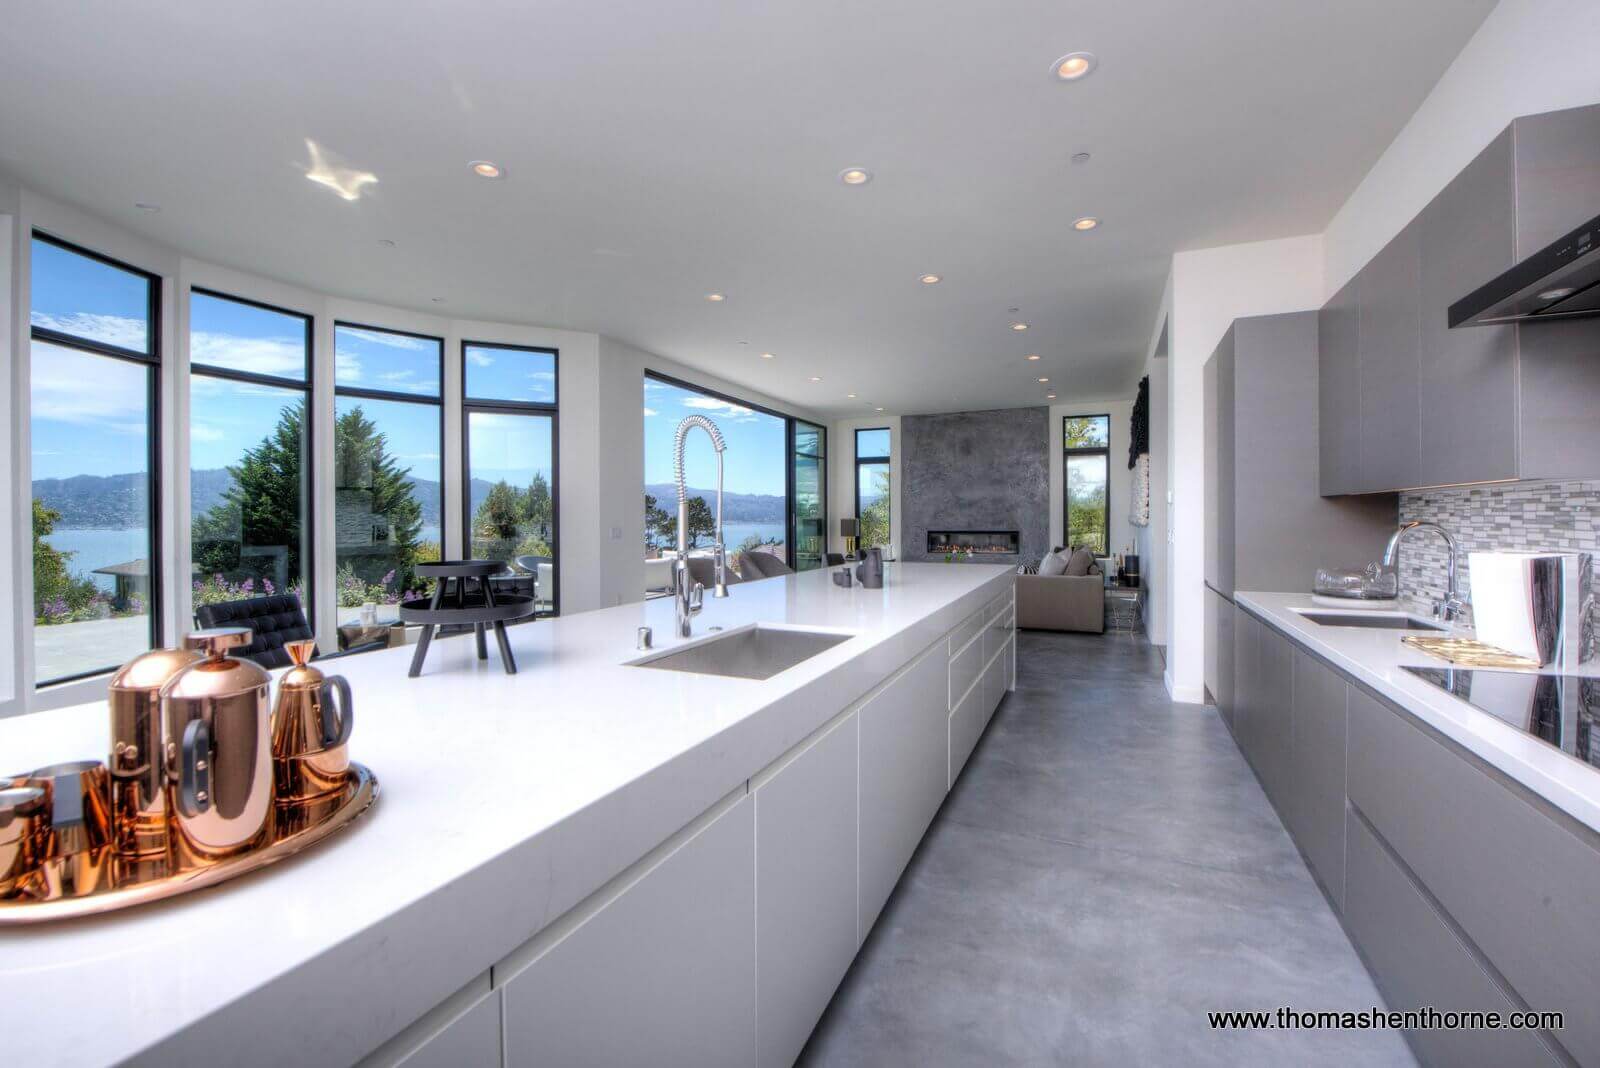 Kitchen with view and open floor plan